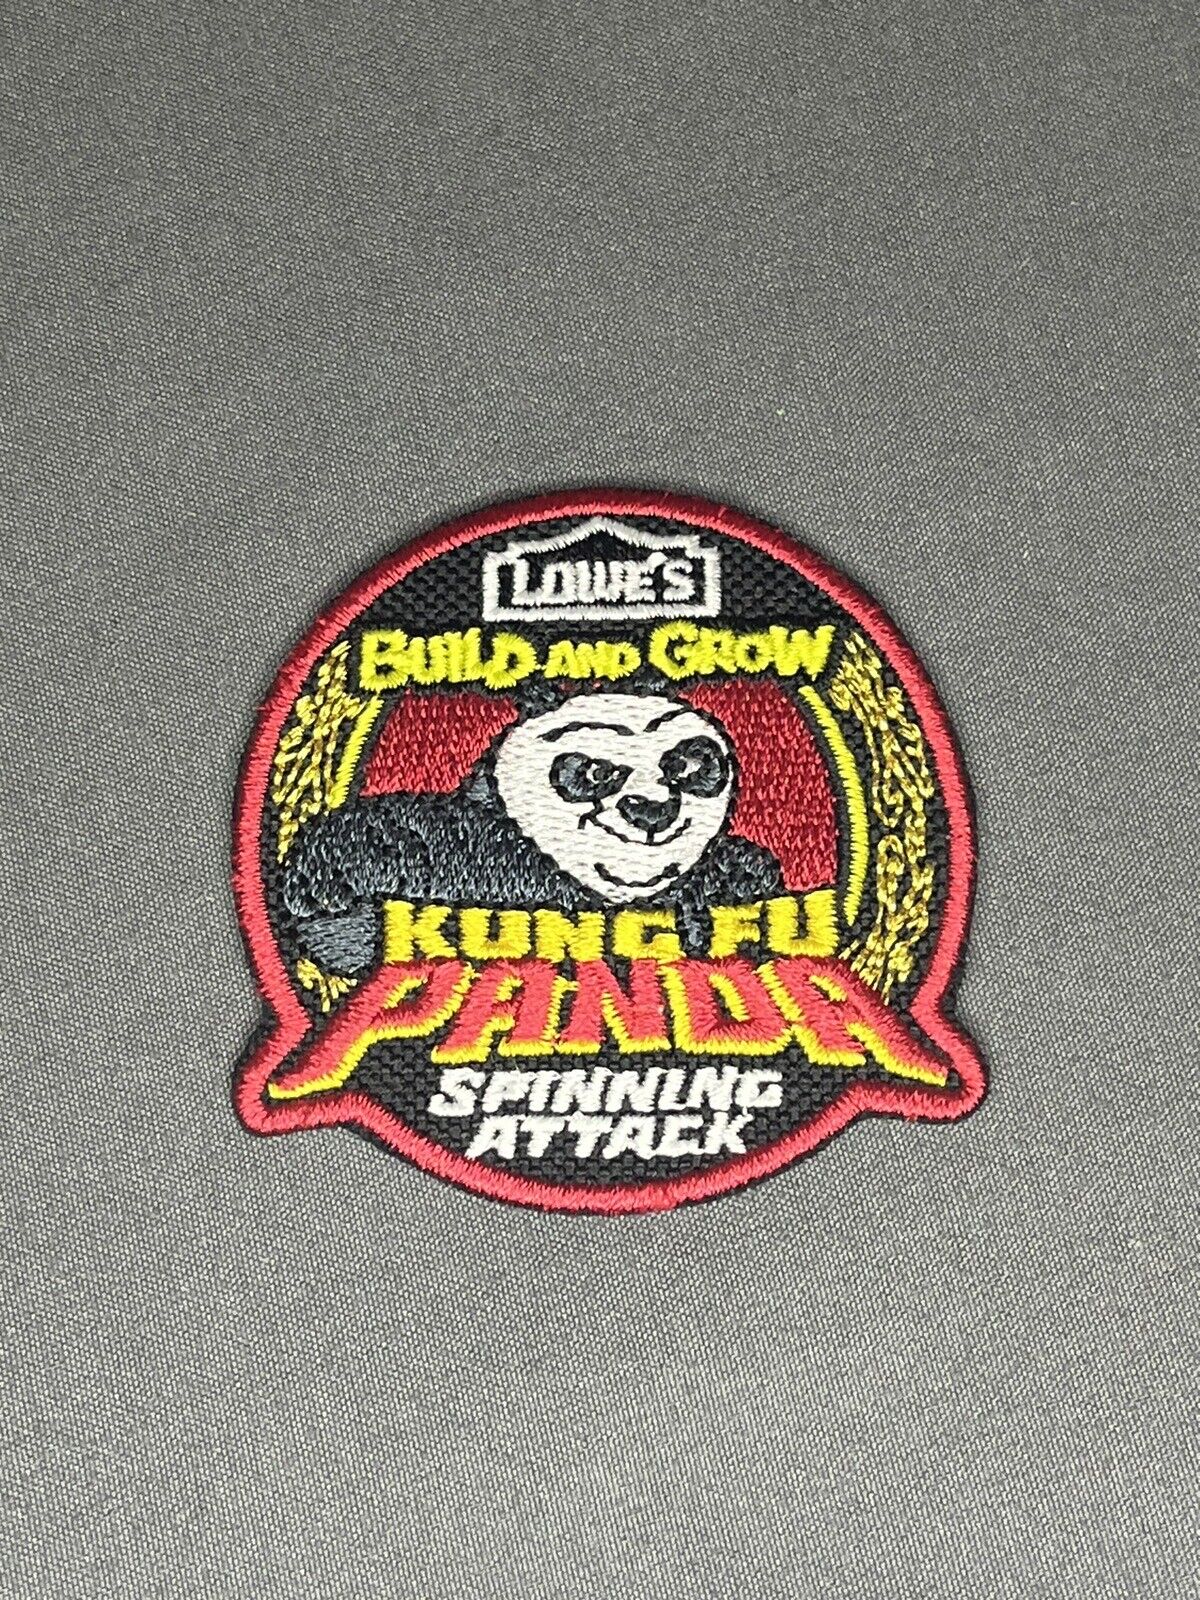 Lowe’s Build And Grow Patch Kung Fu Panda Spinning Attack